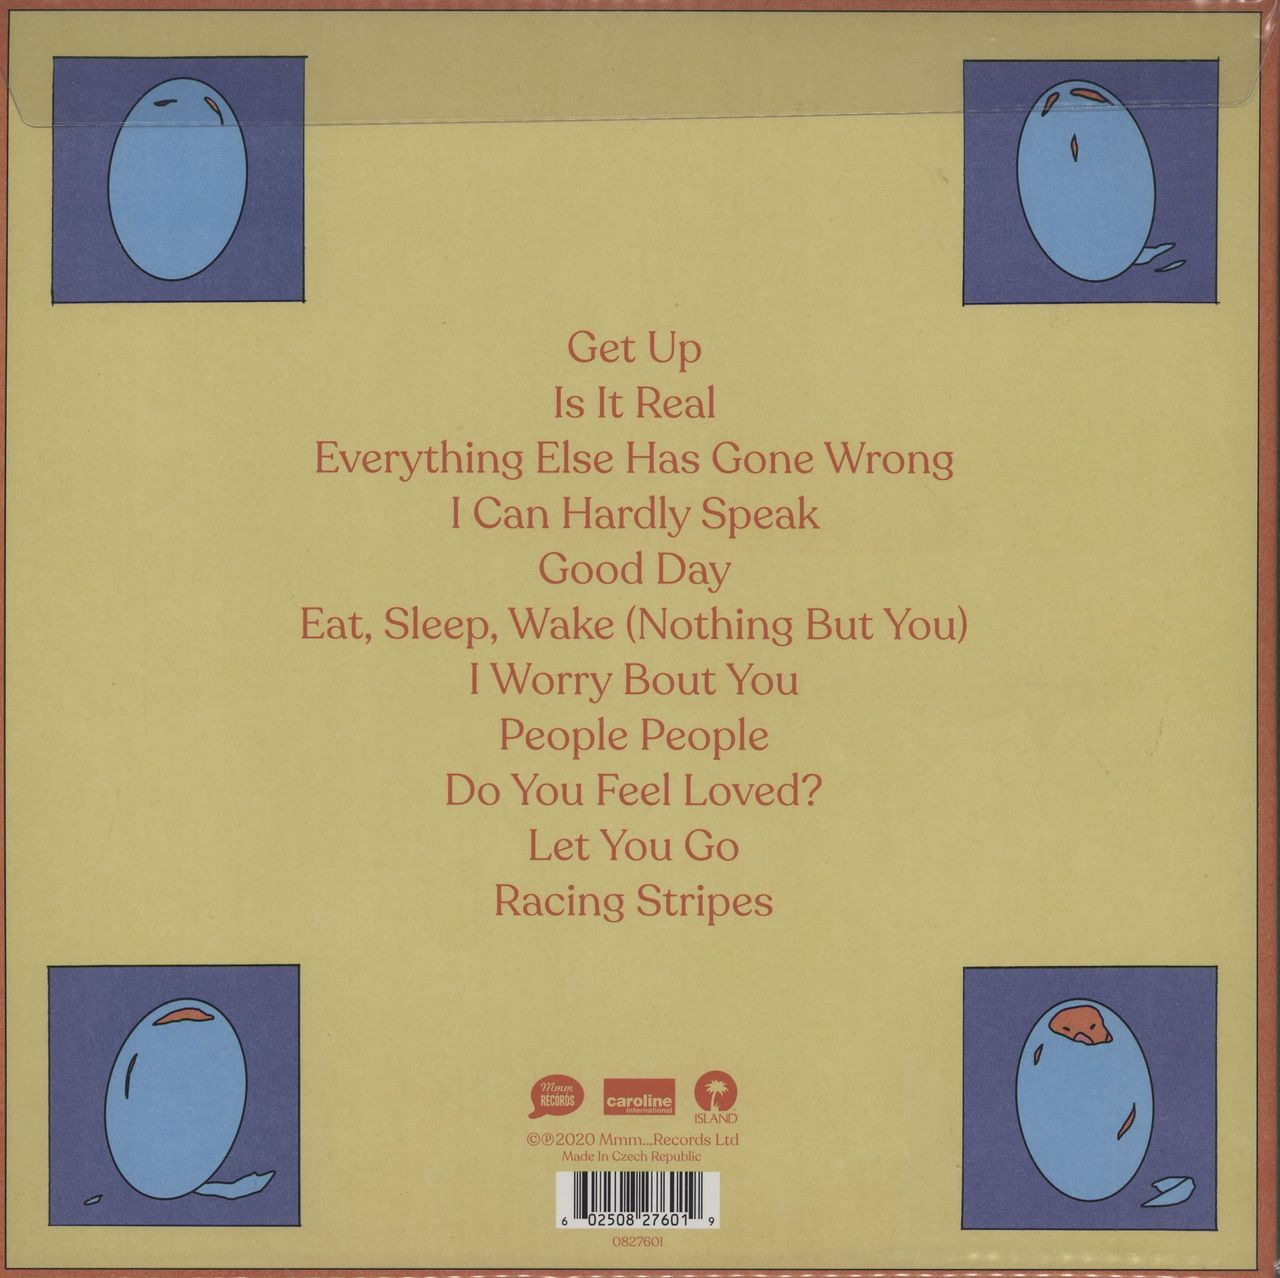 Let's Go To Bed - Lp Vinyl Record